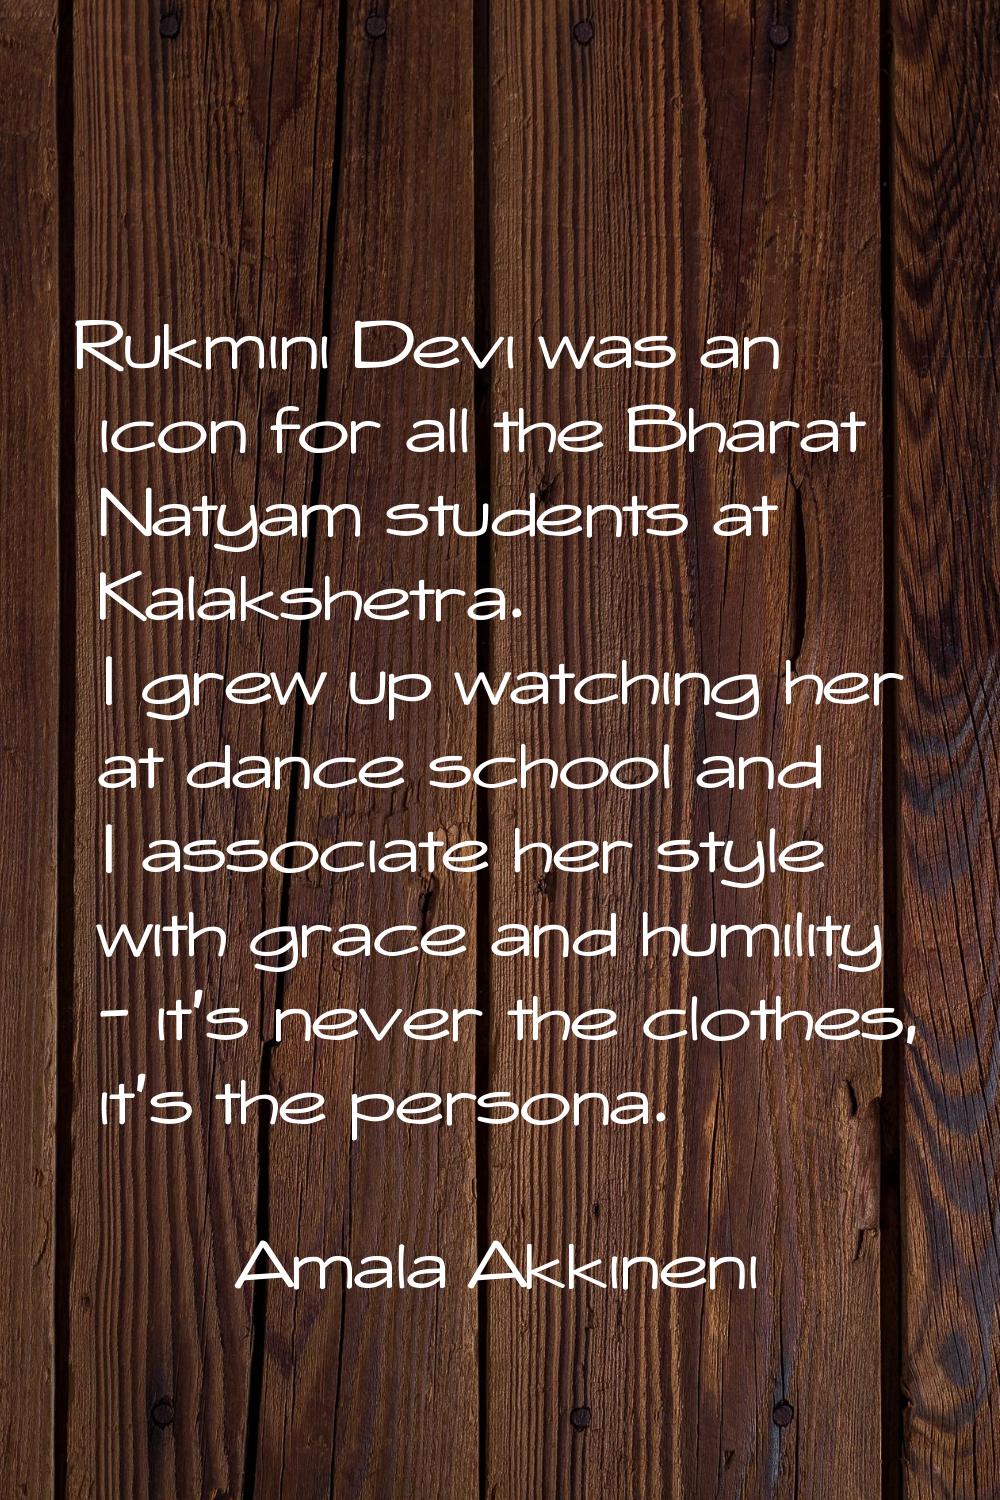 Rukmini Devi was an icon for all the Bharat Natyam students at Kalakshetra. I grew up watching her 